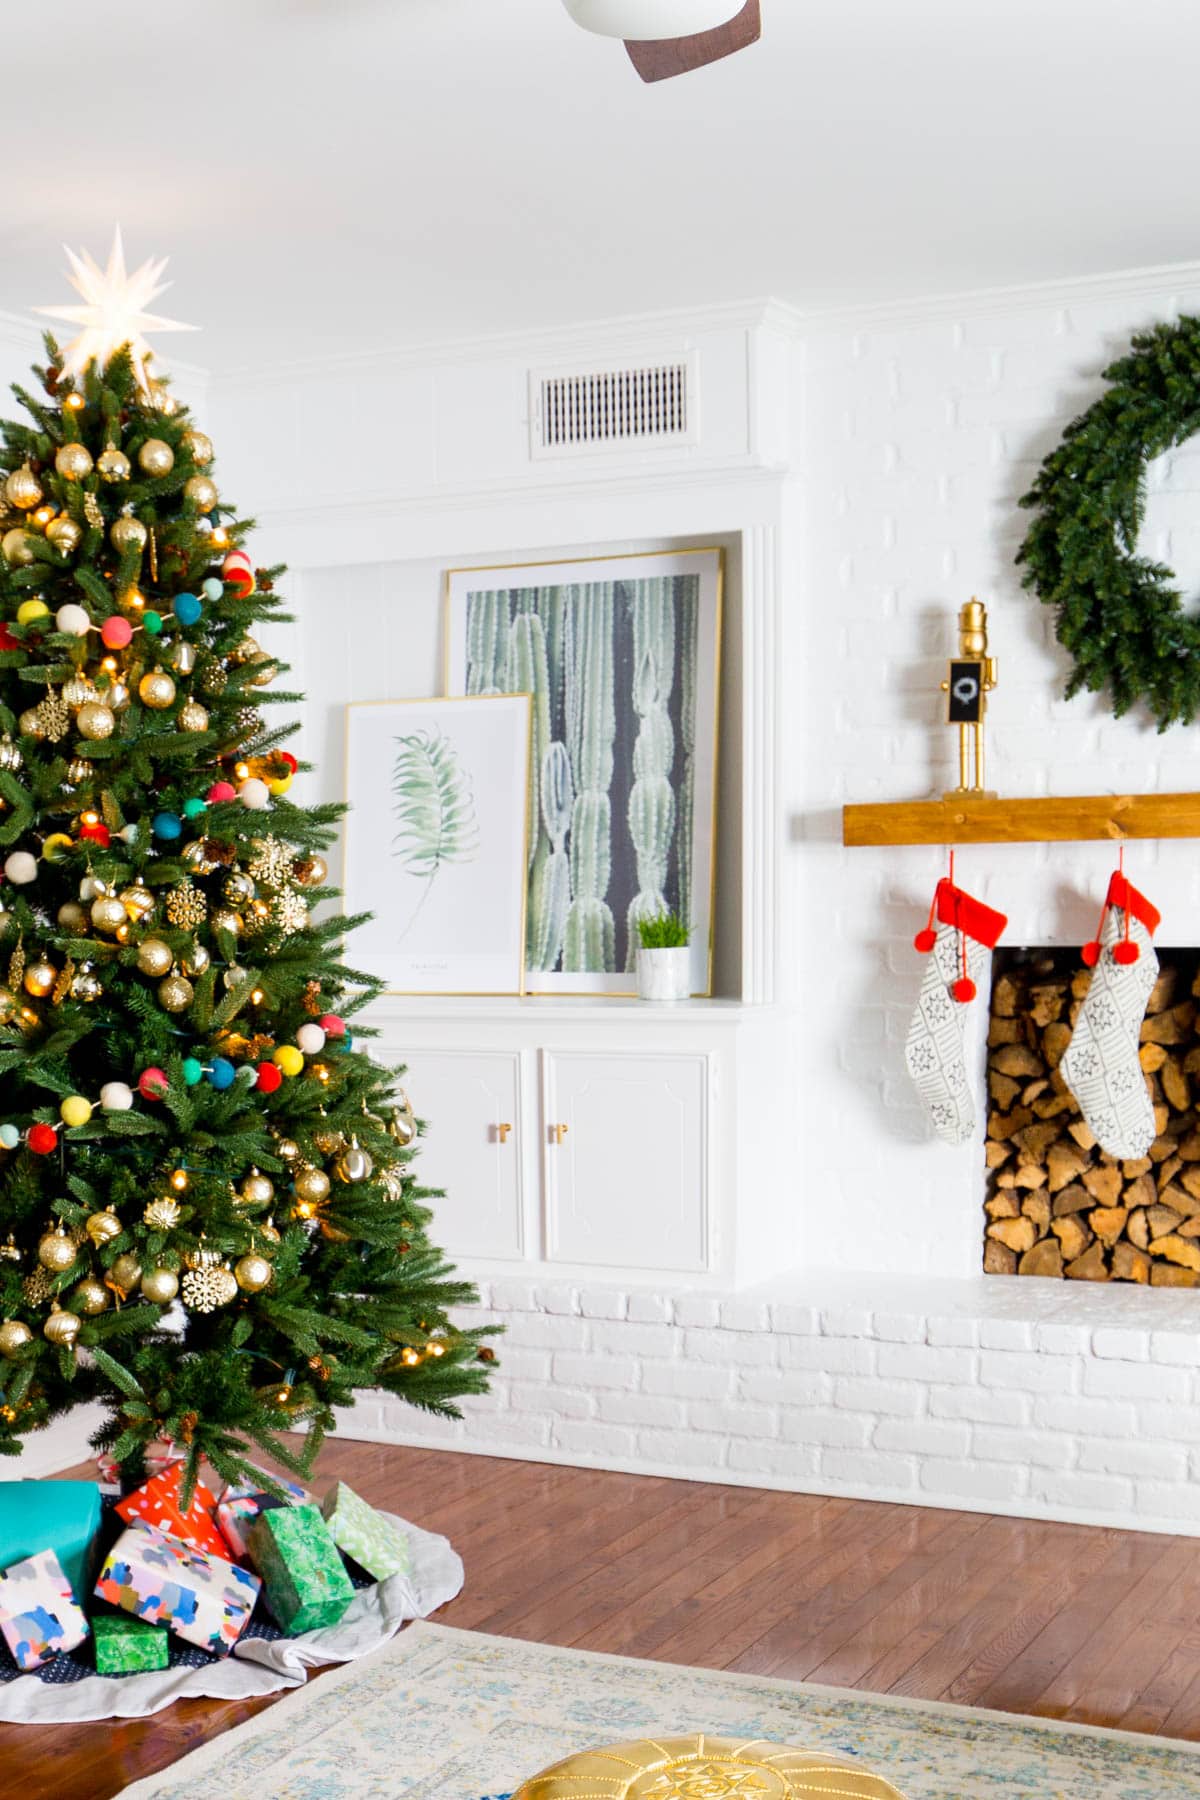 The Holiday Living Room Makeover we Gifted with Lowe's! by Lifestyle Blogger Ashley Rose of Sugar & Cloth in Houston, TX